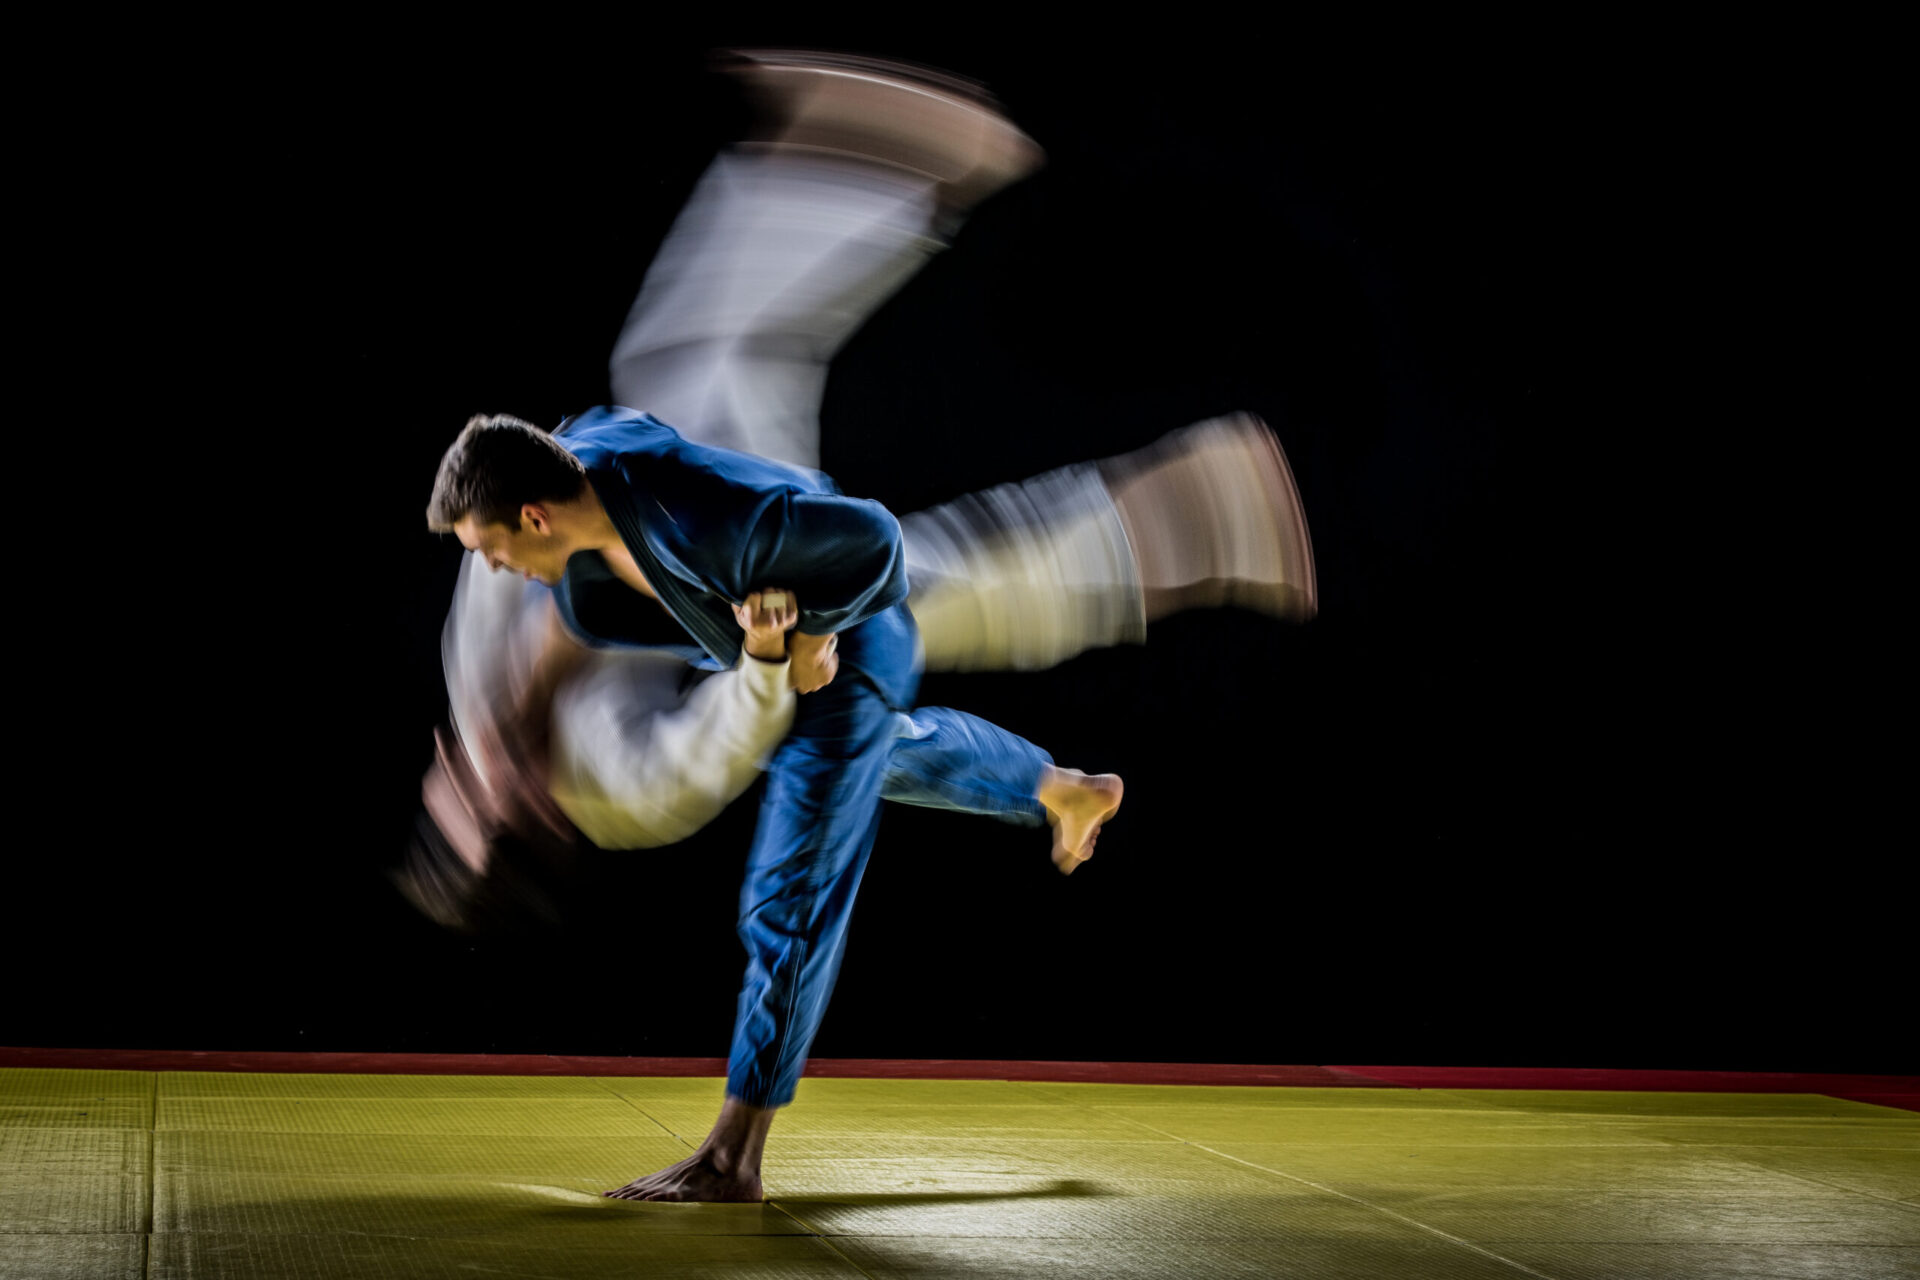 Blurred motion of two male judo players fighting during competition.